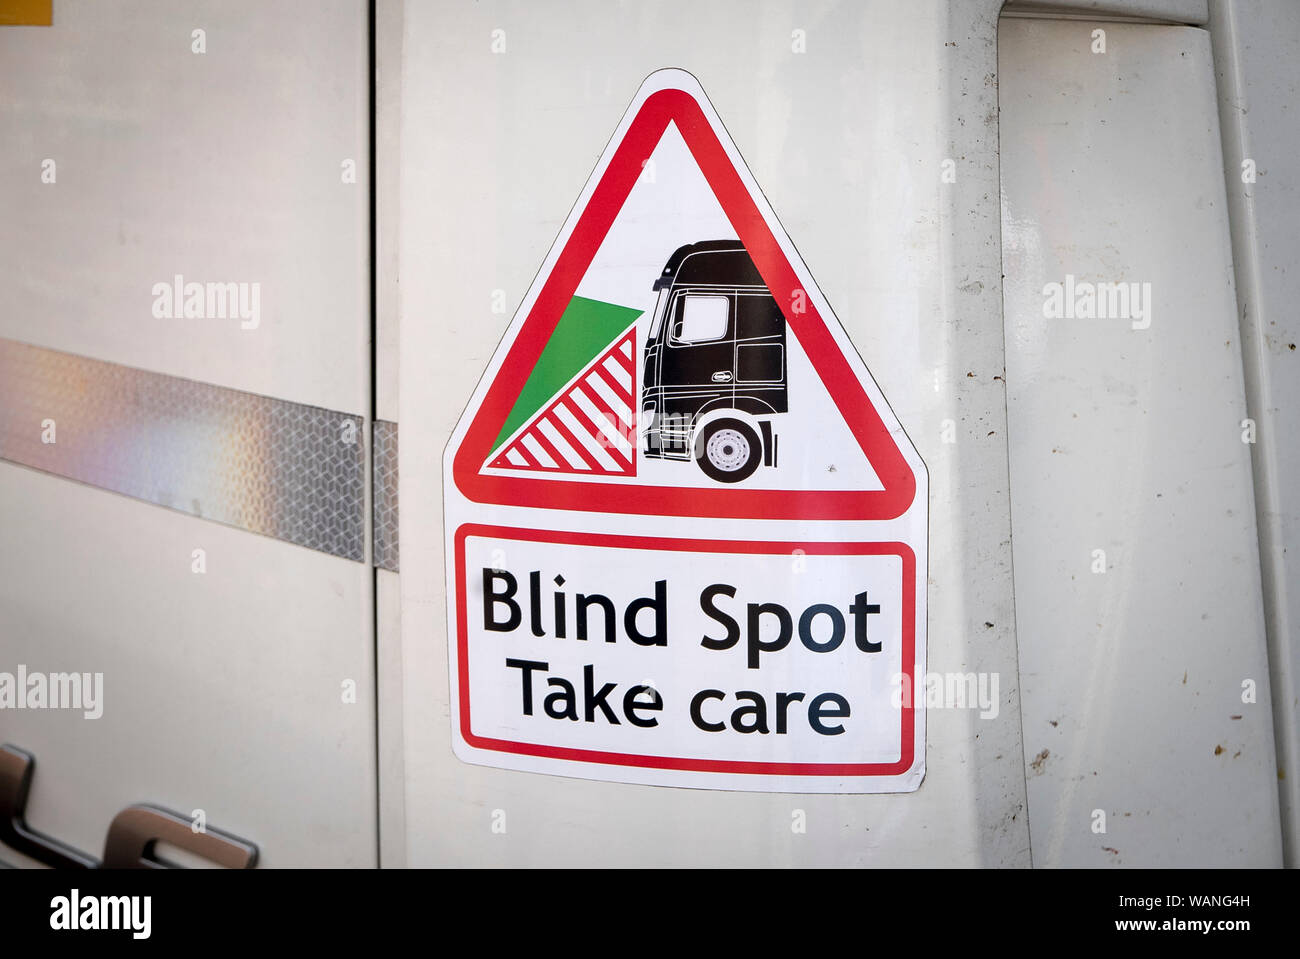 Warning sign and symbol concerning limitations of truck driver's vision when manoeuvering among pedestrians in towns Stock Photo